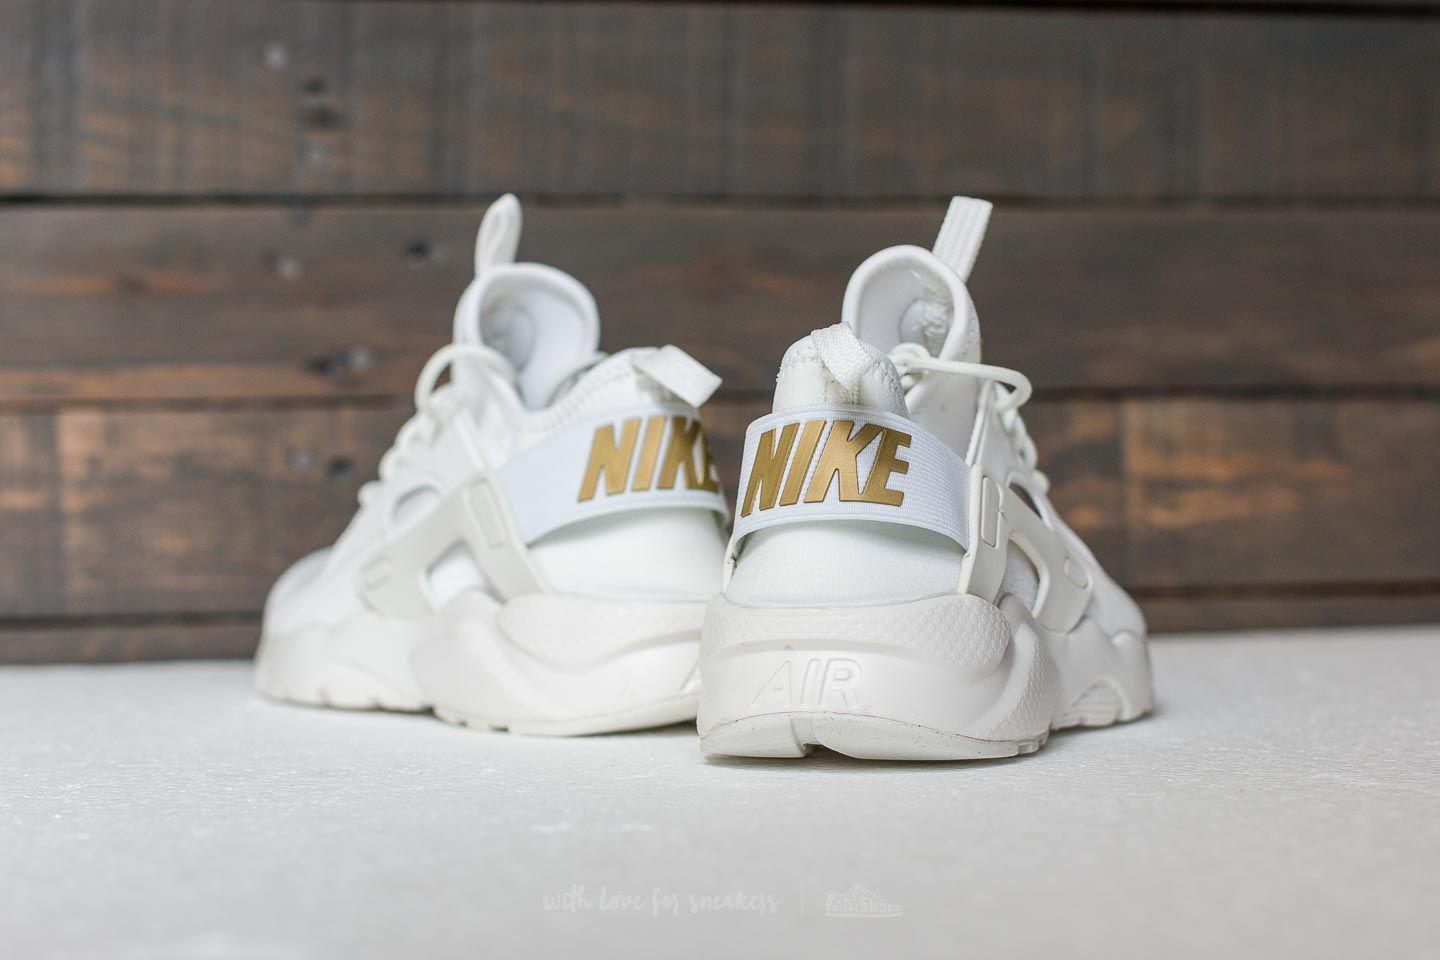 gold and white huaraches